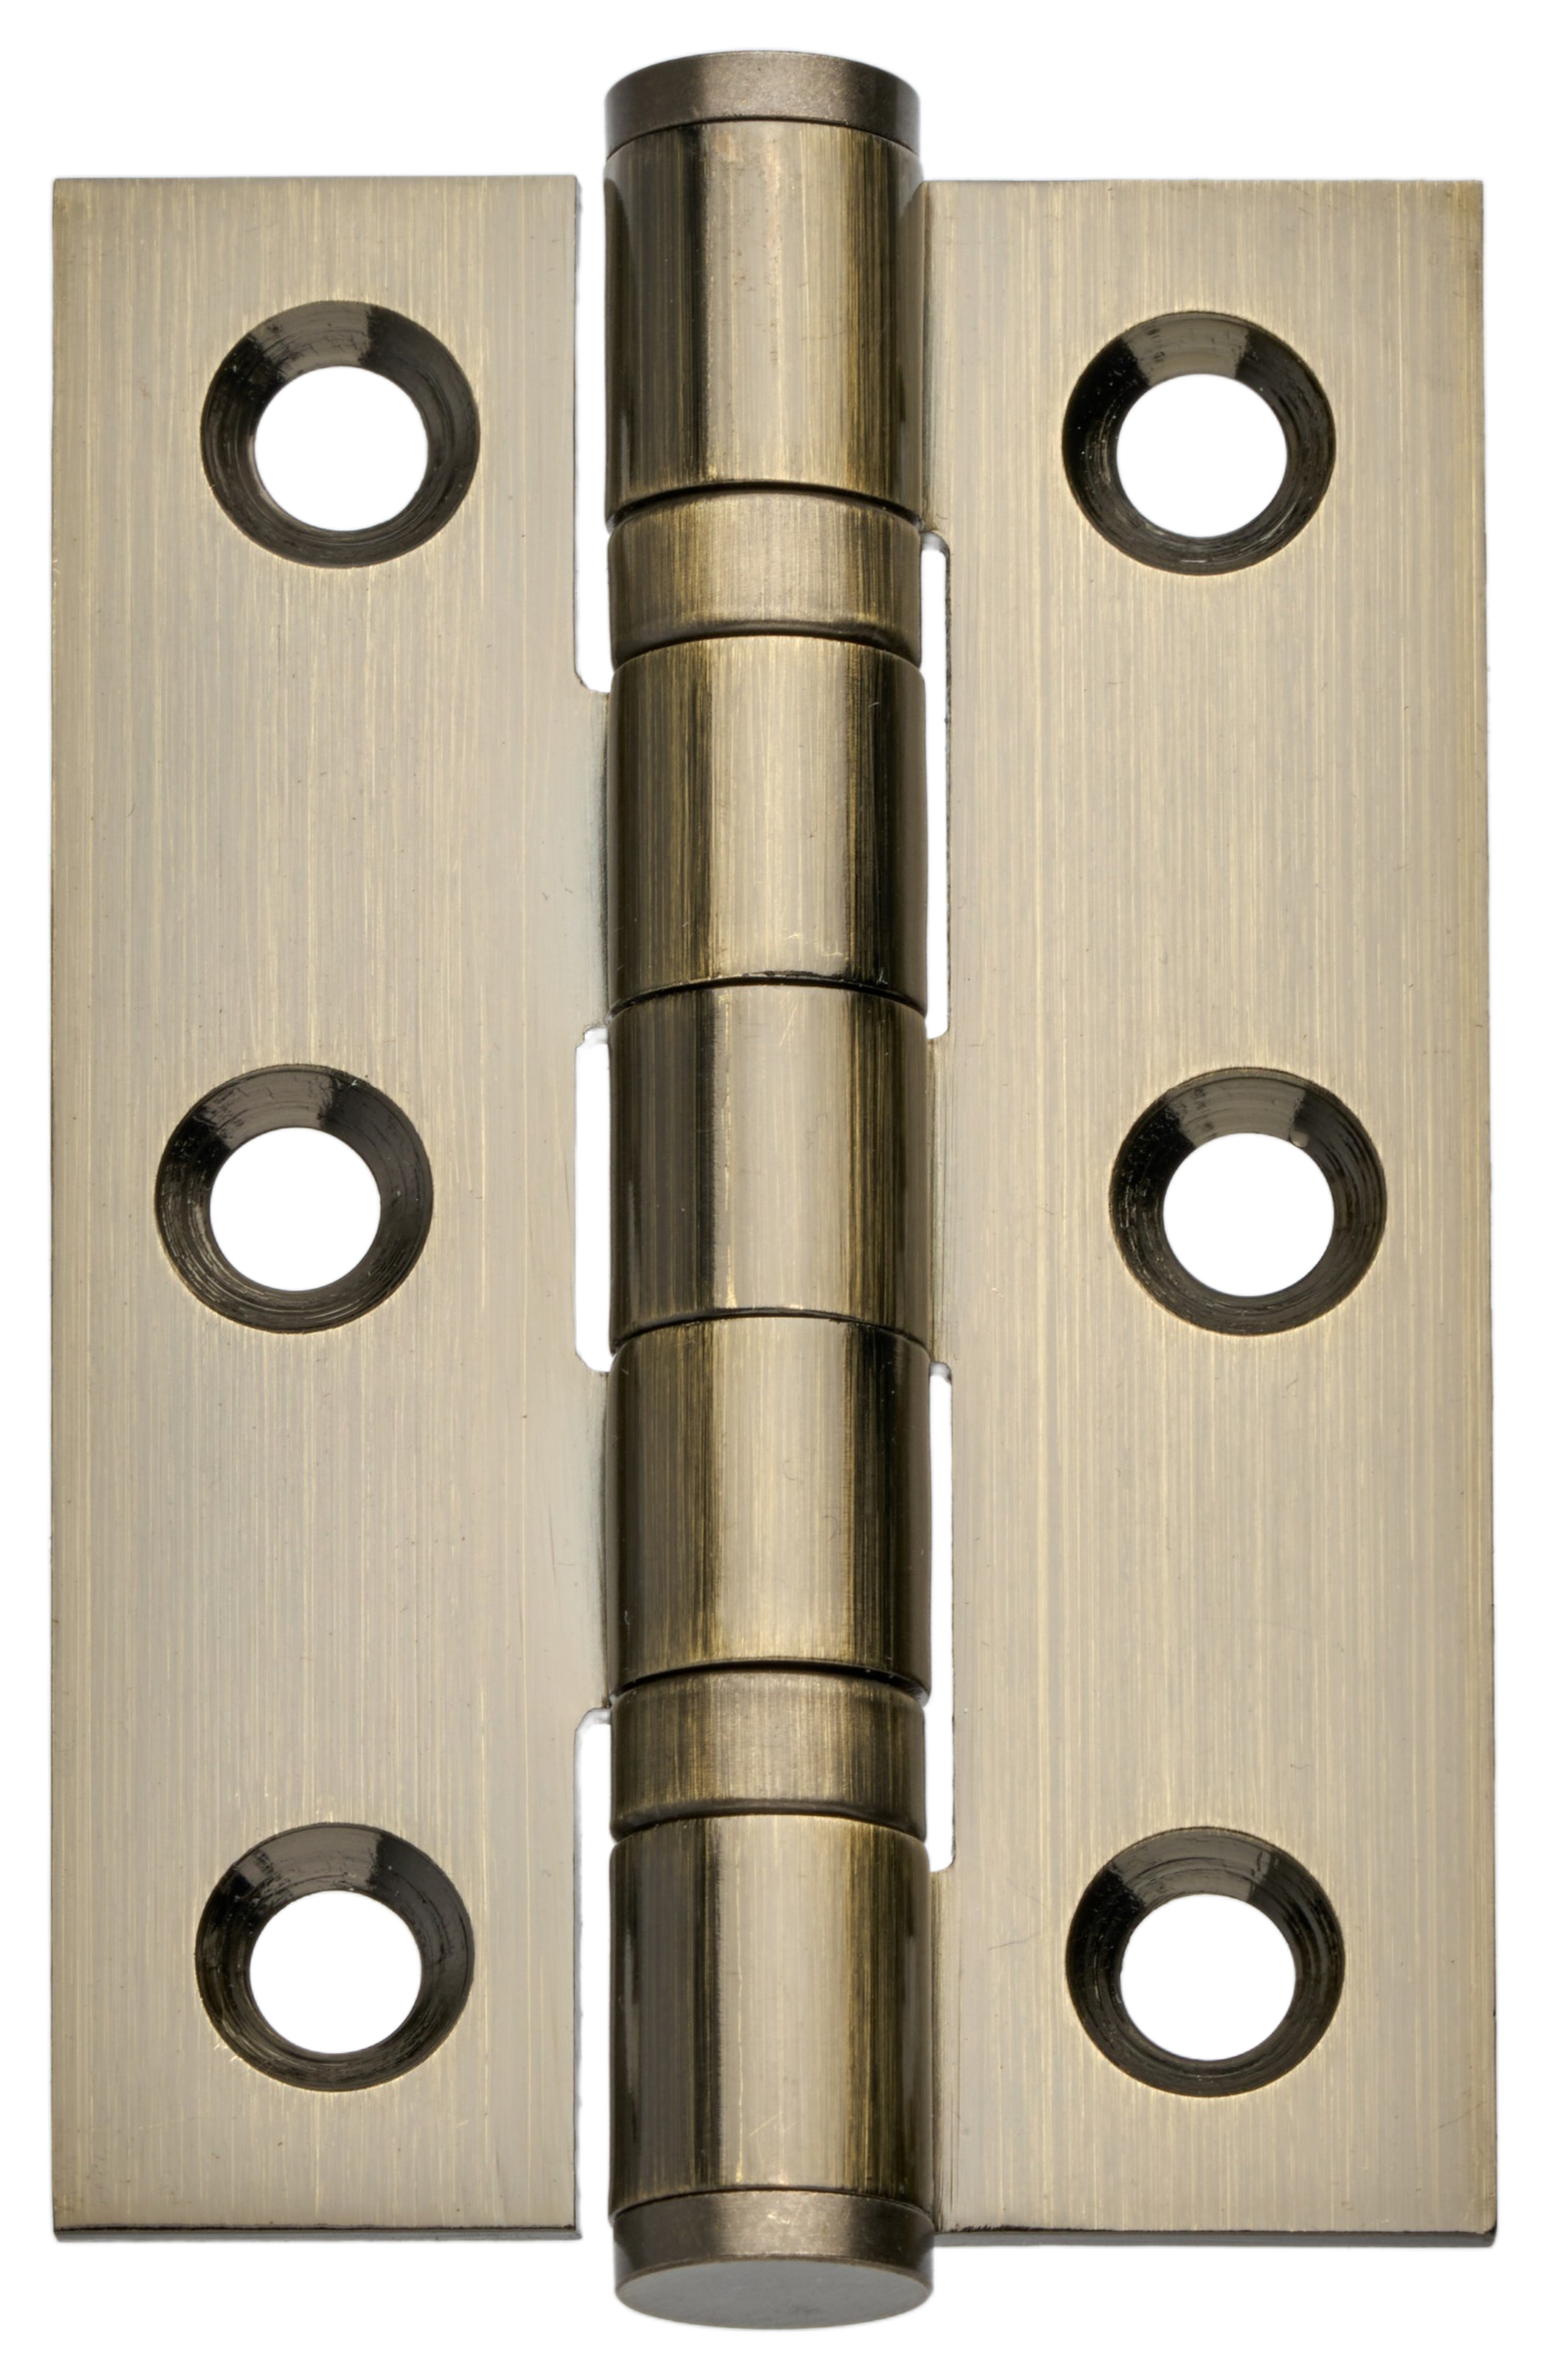 Image of Ball Bearing Hinge Stainless Steel Antique Brass 76mm - Pack of 3